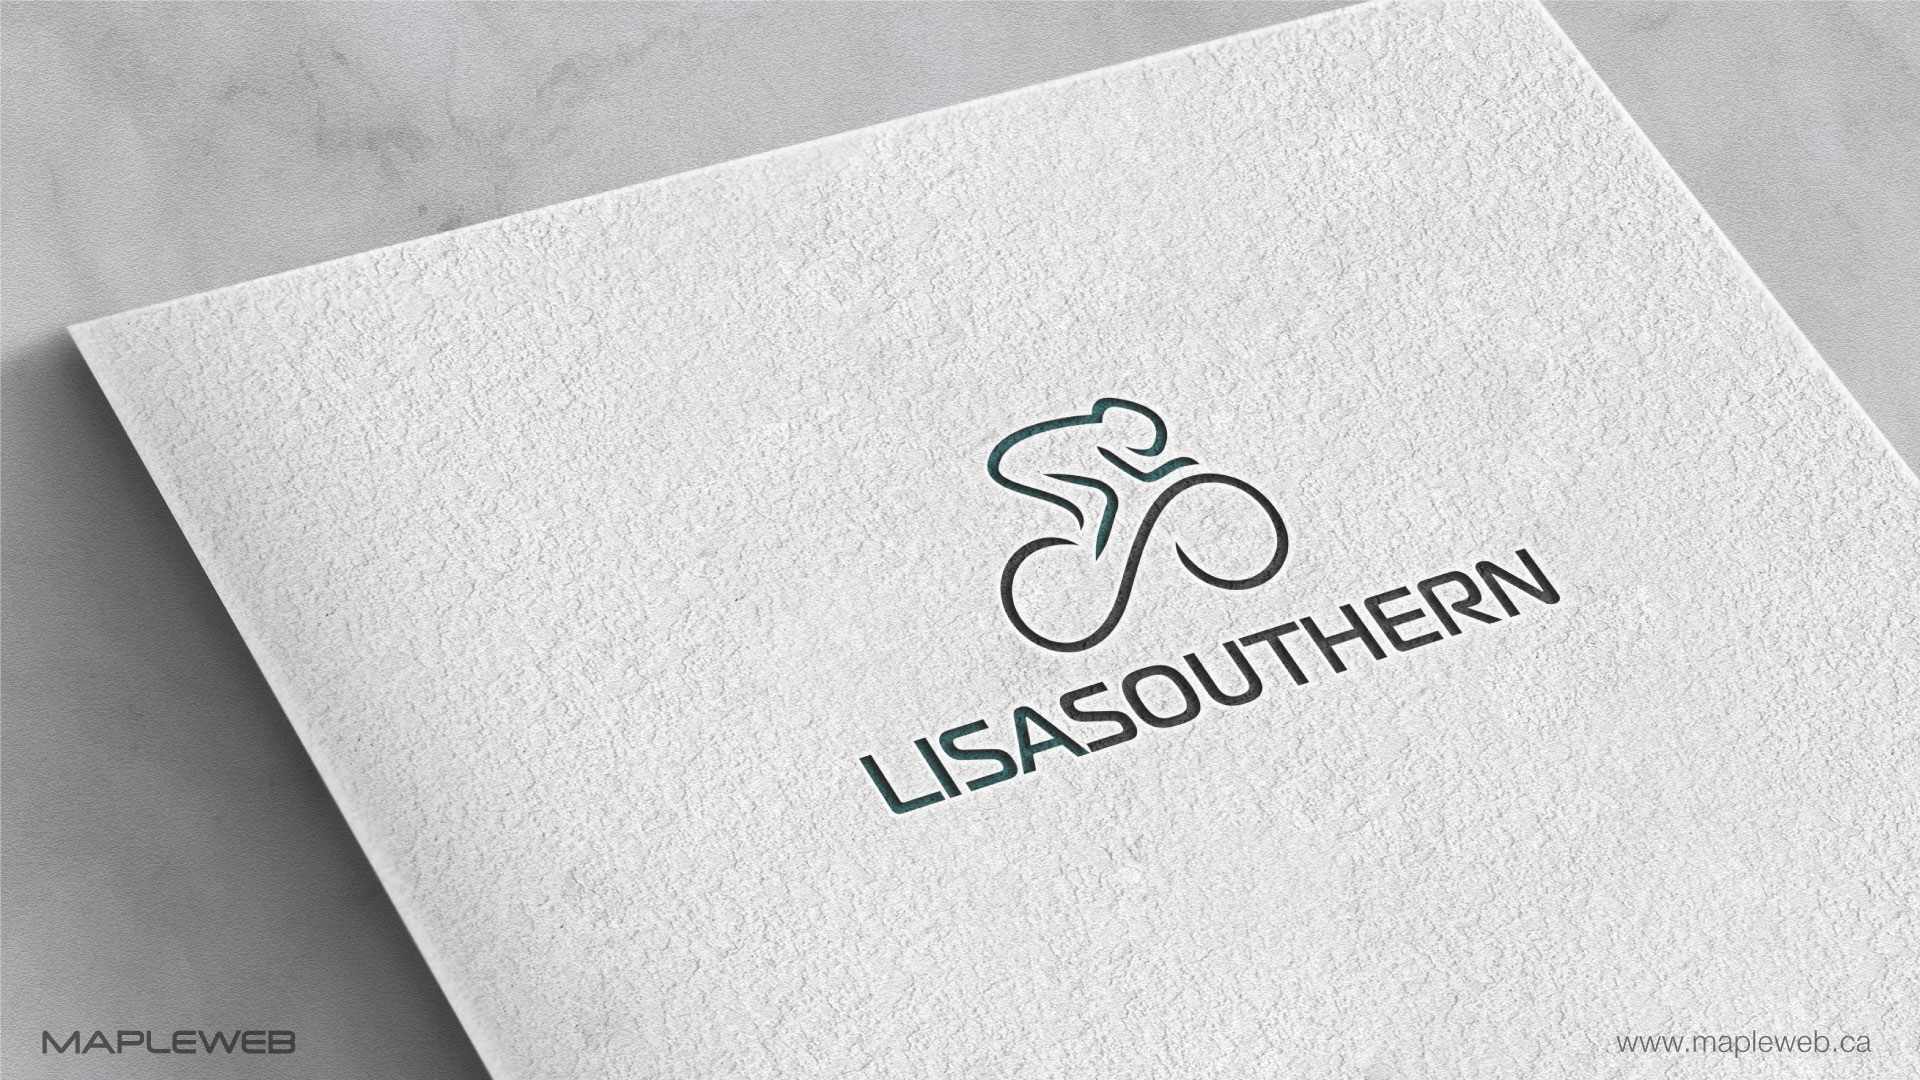 lisa-southern-brand-logo-design-by-mapleweb-vancouver-canada-paper-mock